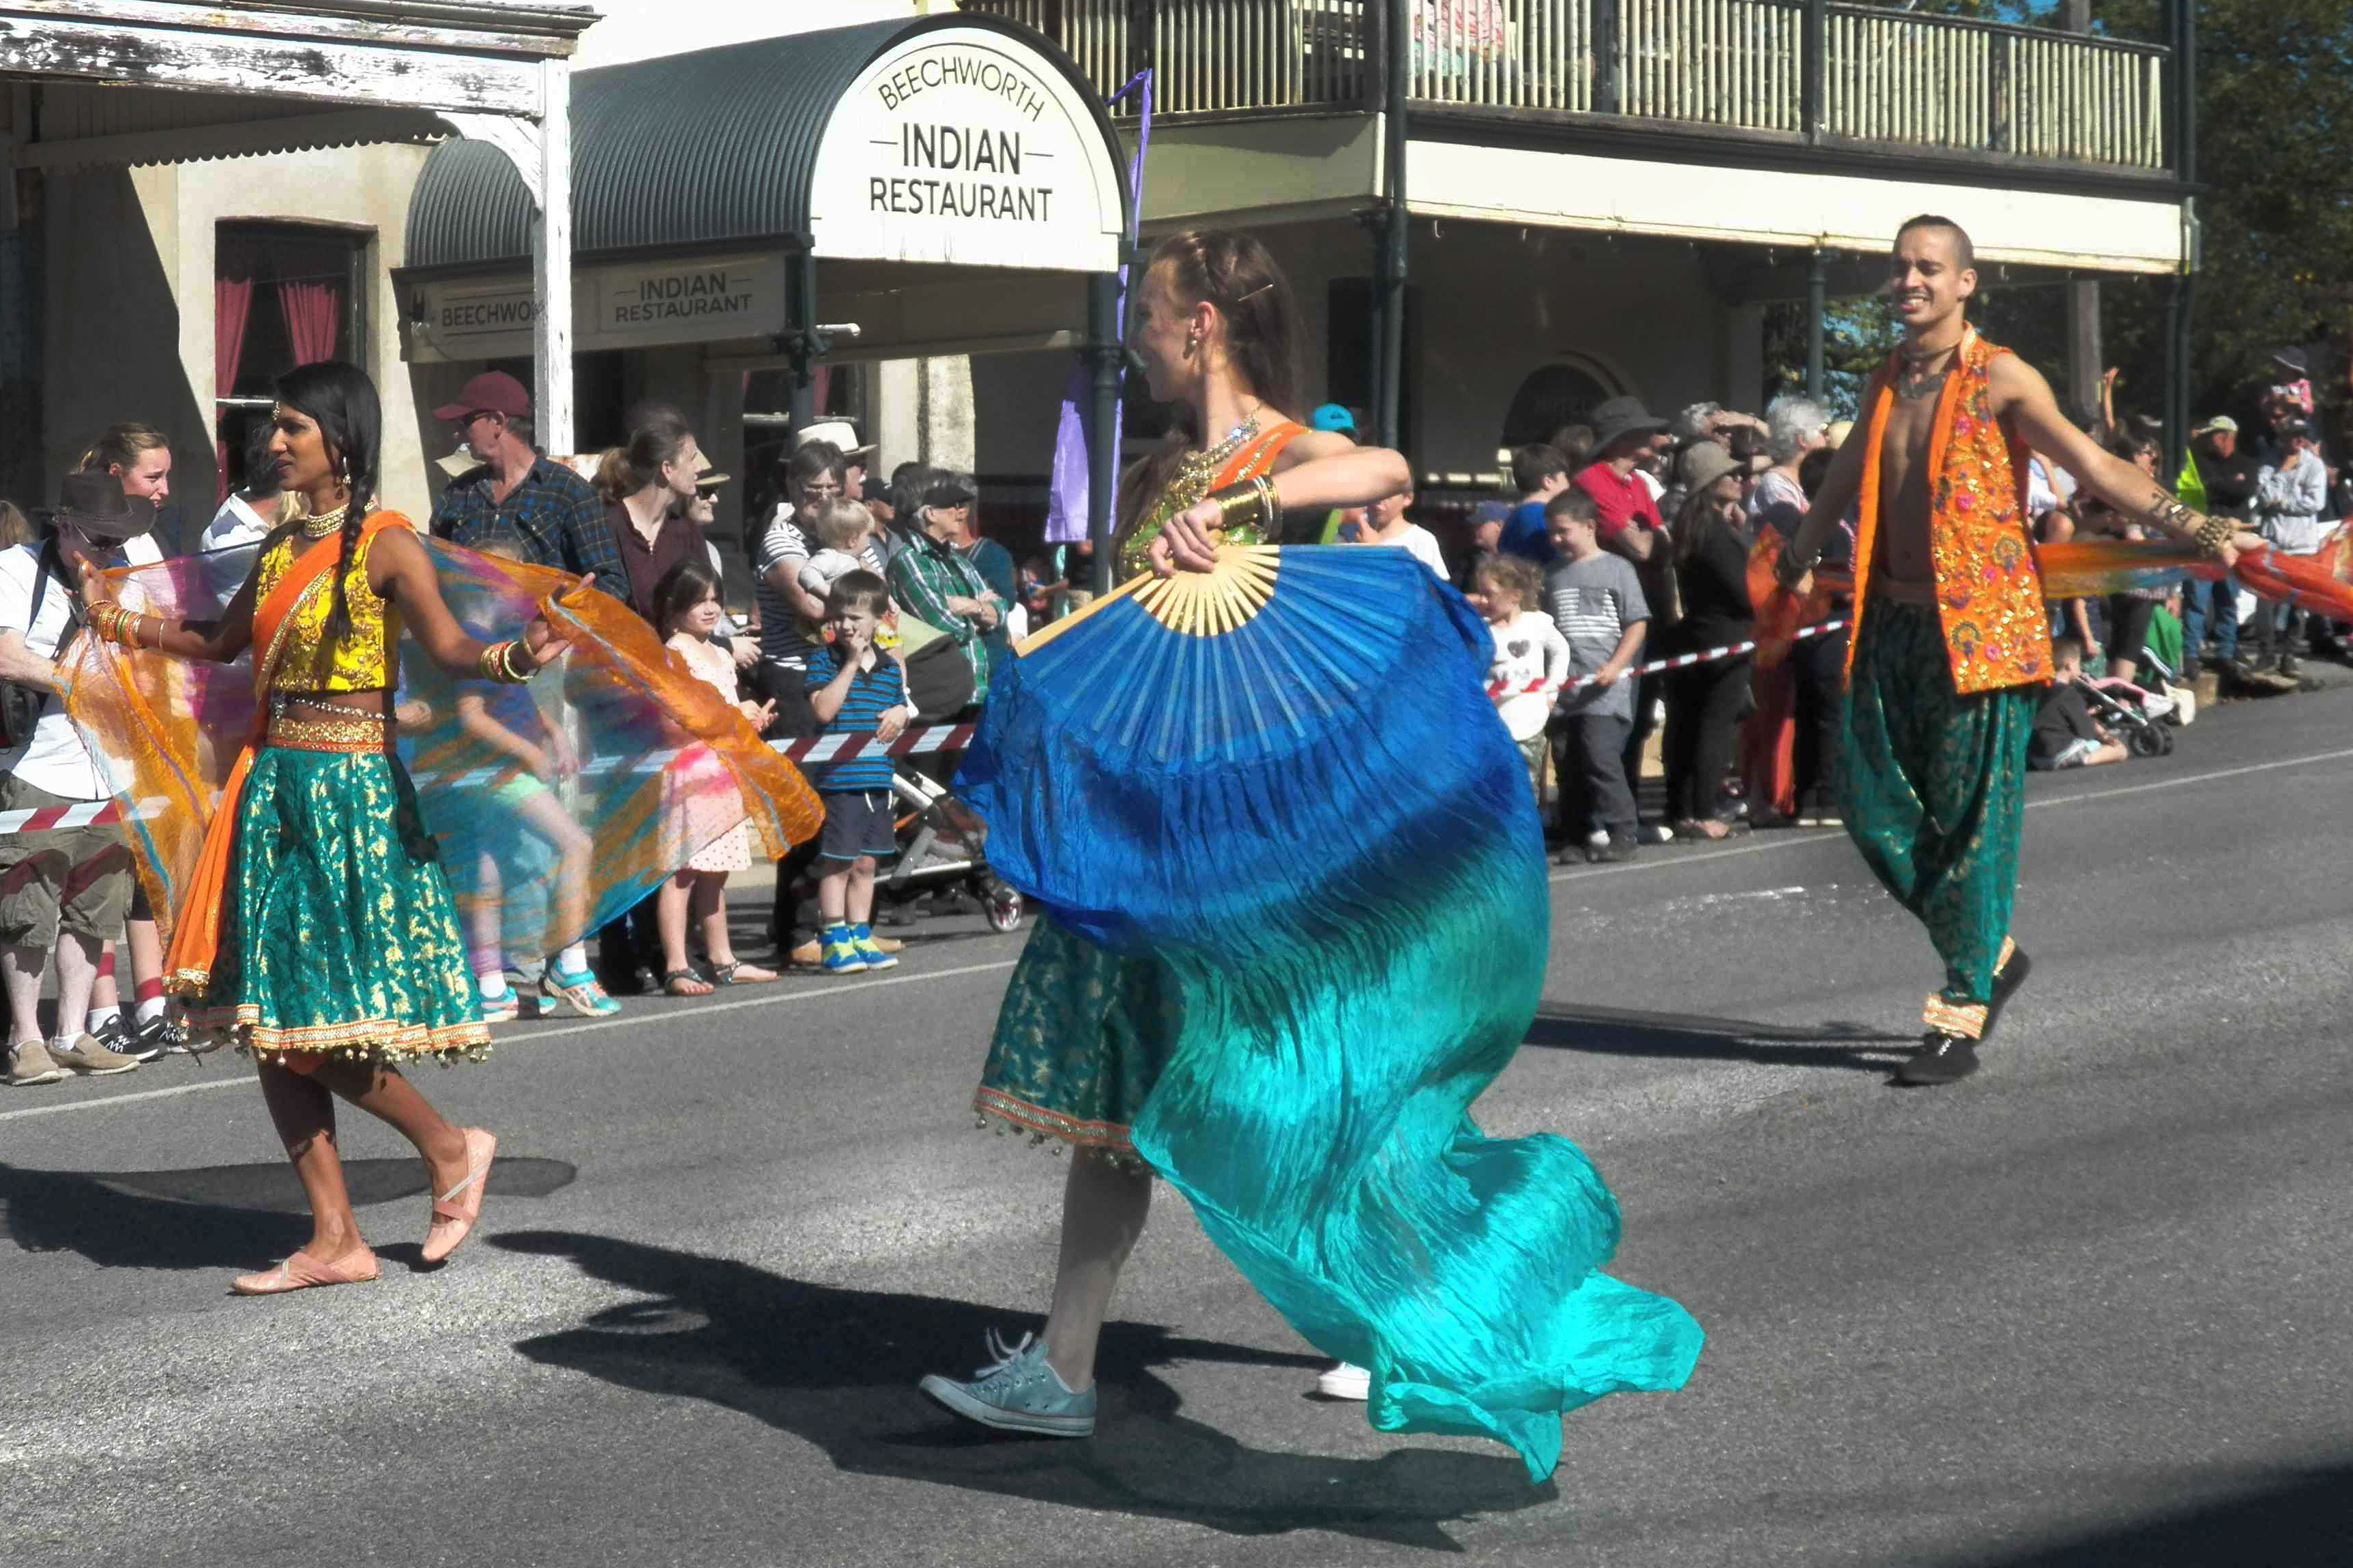 Bollywood dancers from Sapphire Dance grace Beechworth’s main street bringing colour to the annual Golden Horseshoe Festival parade.